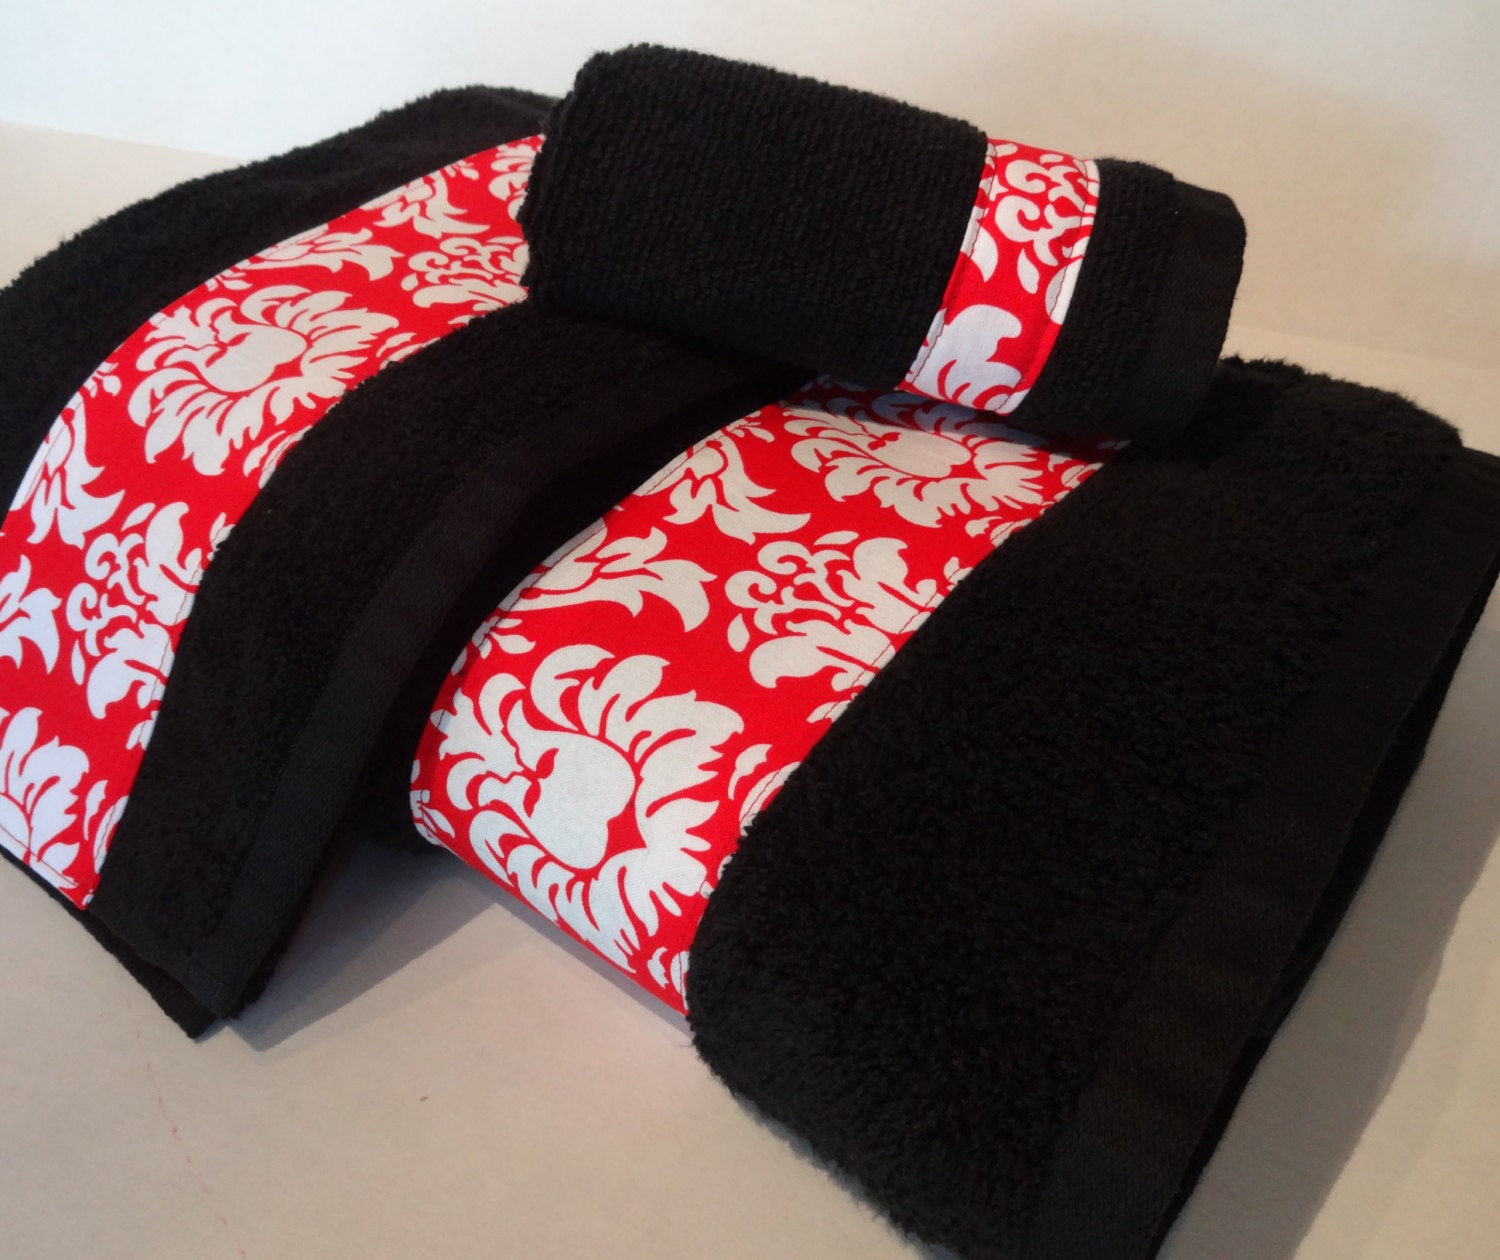  Black  and Red  Damask Bath Towels  Bathroom  towels  red  and